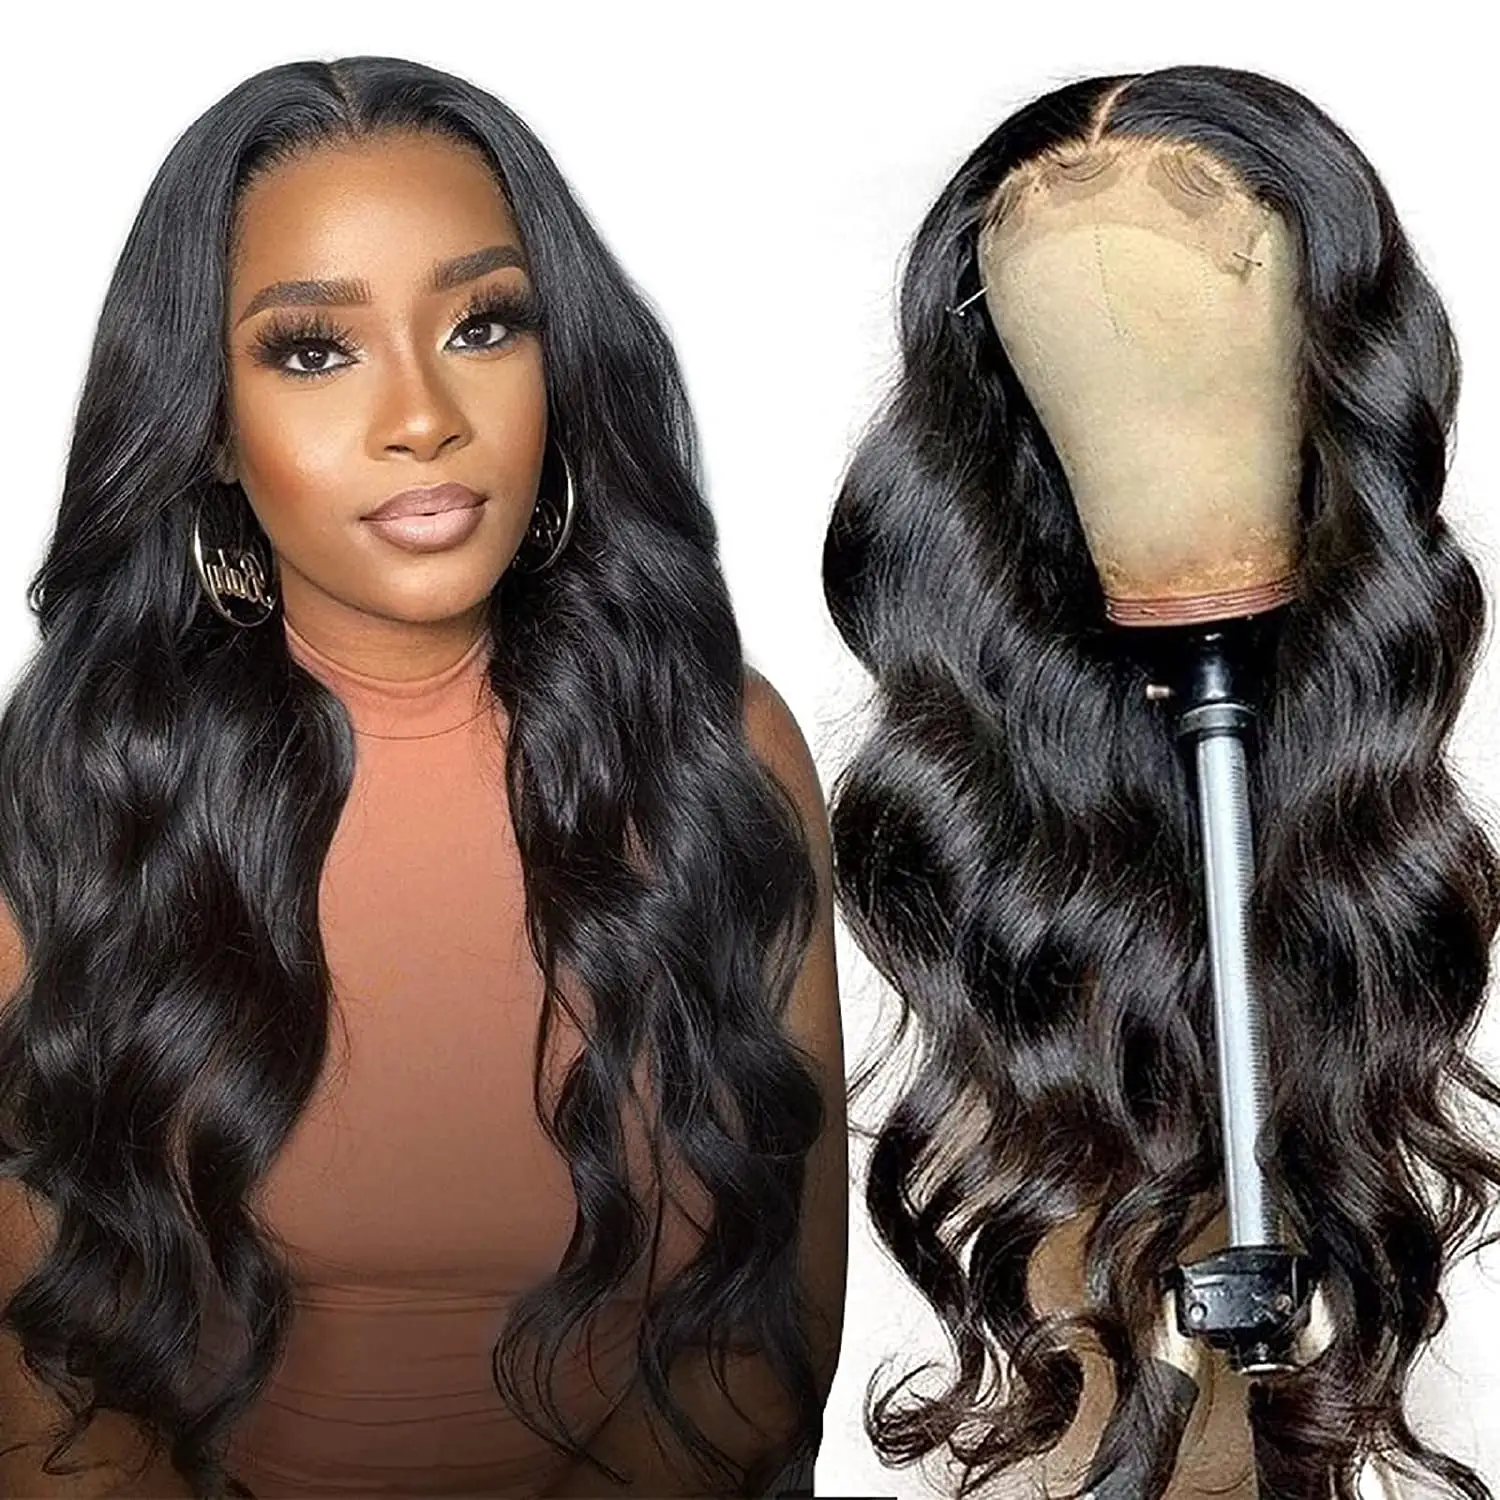 100% Unprocessed Virgin Human Hair Human Hair Wig,Long Body Wave Hair Swiss Lace Front Wigs